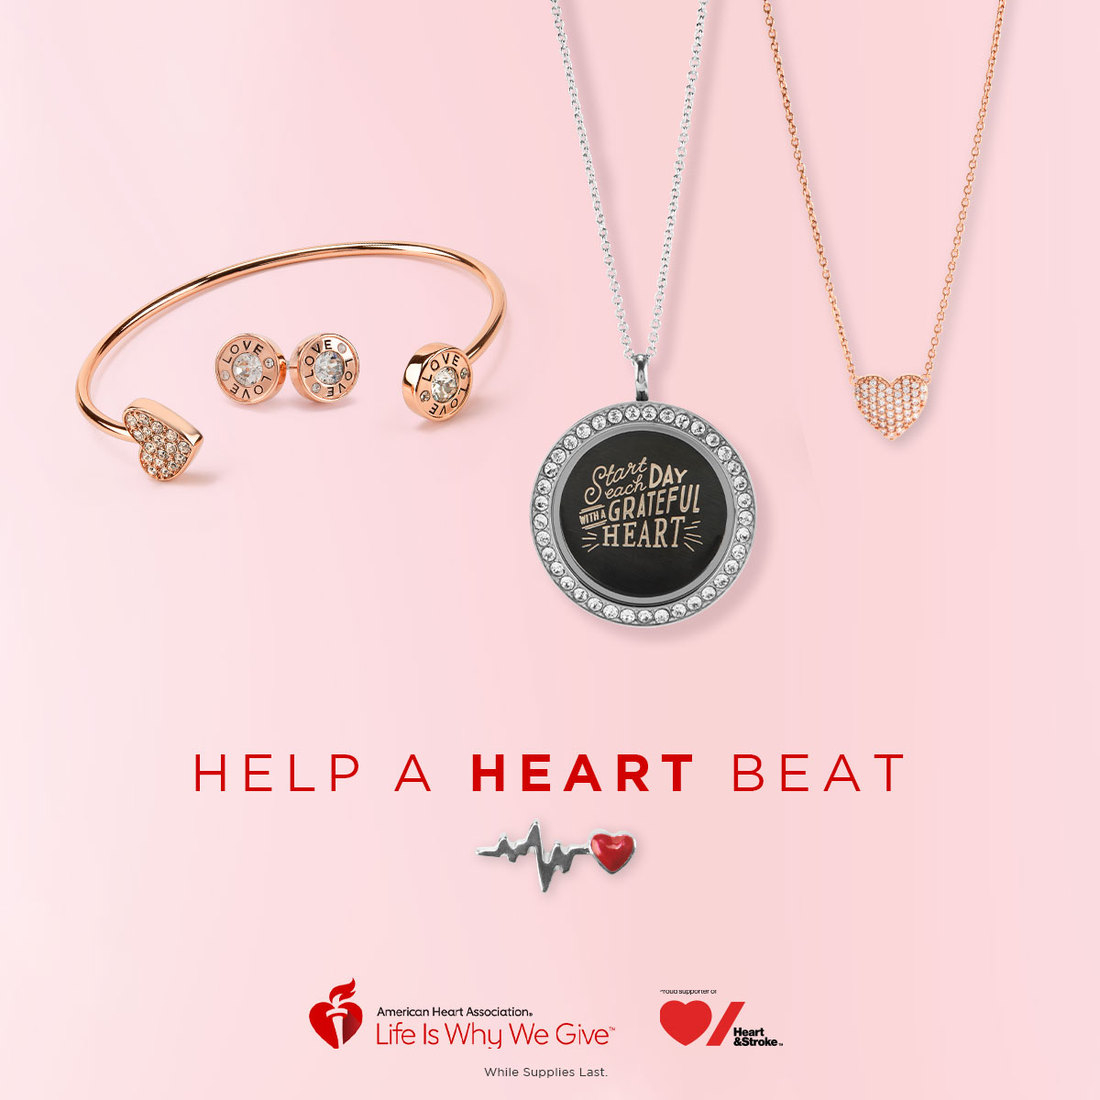 Origami Owl Over The Heart Chain Origami Owl March Specials Promotions Direct Sales And Home Based